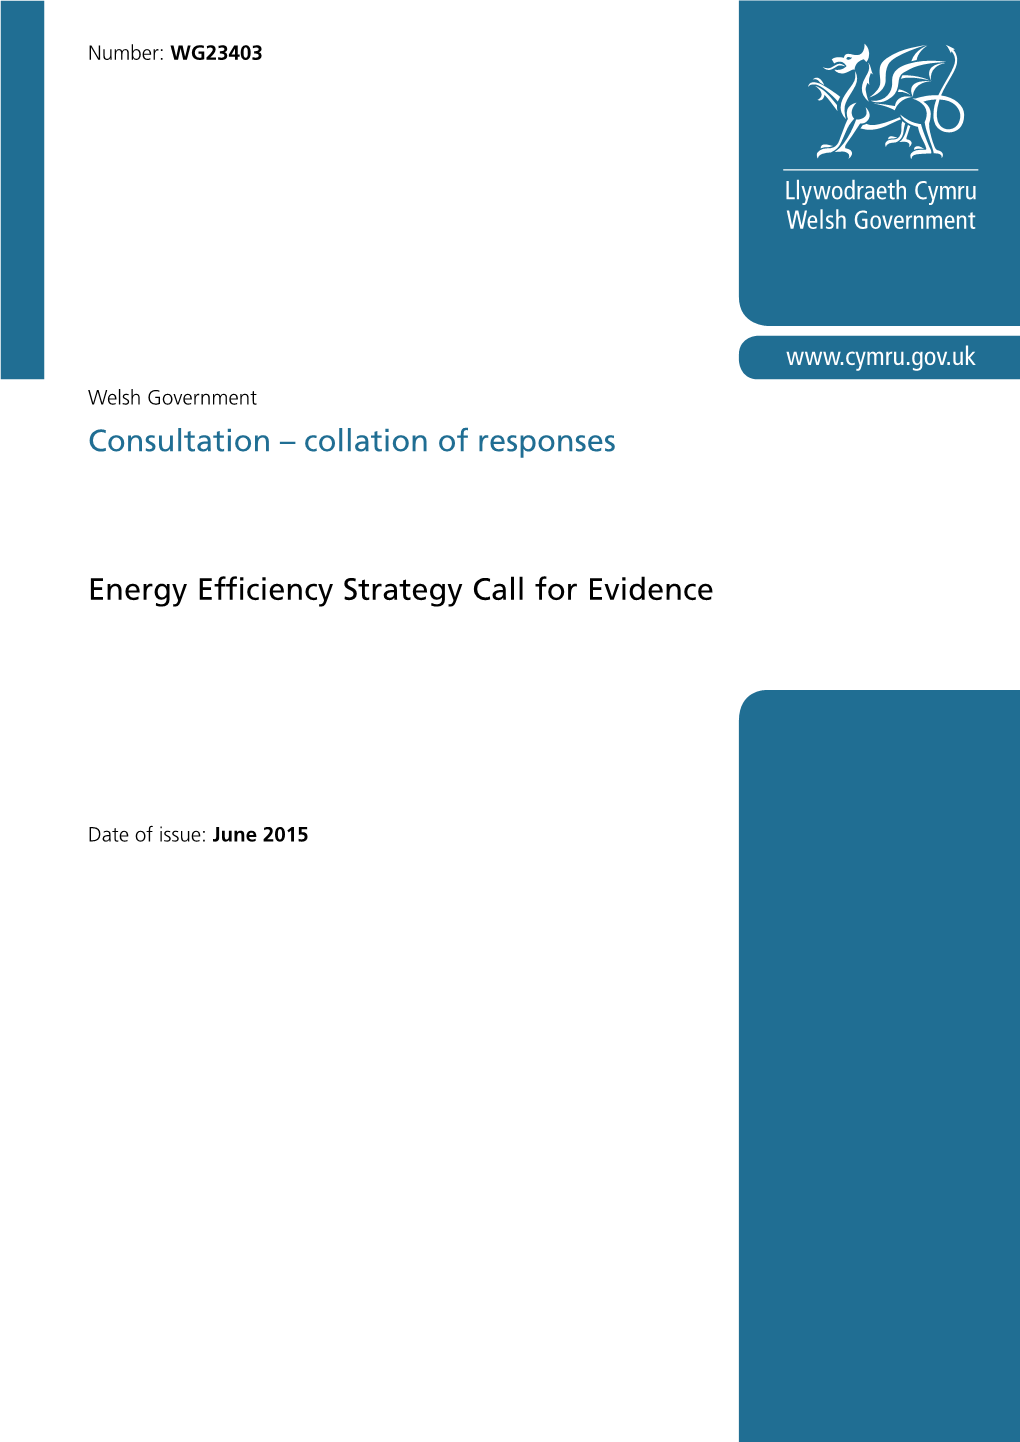 Publication of the Energy Efficiency Call for Evidence